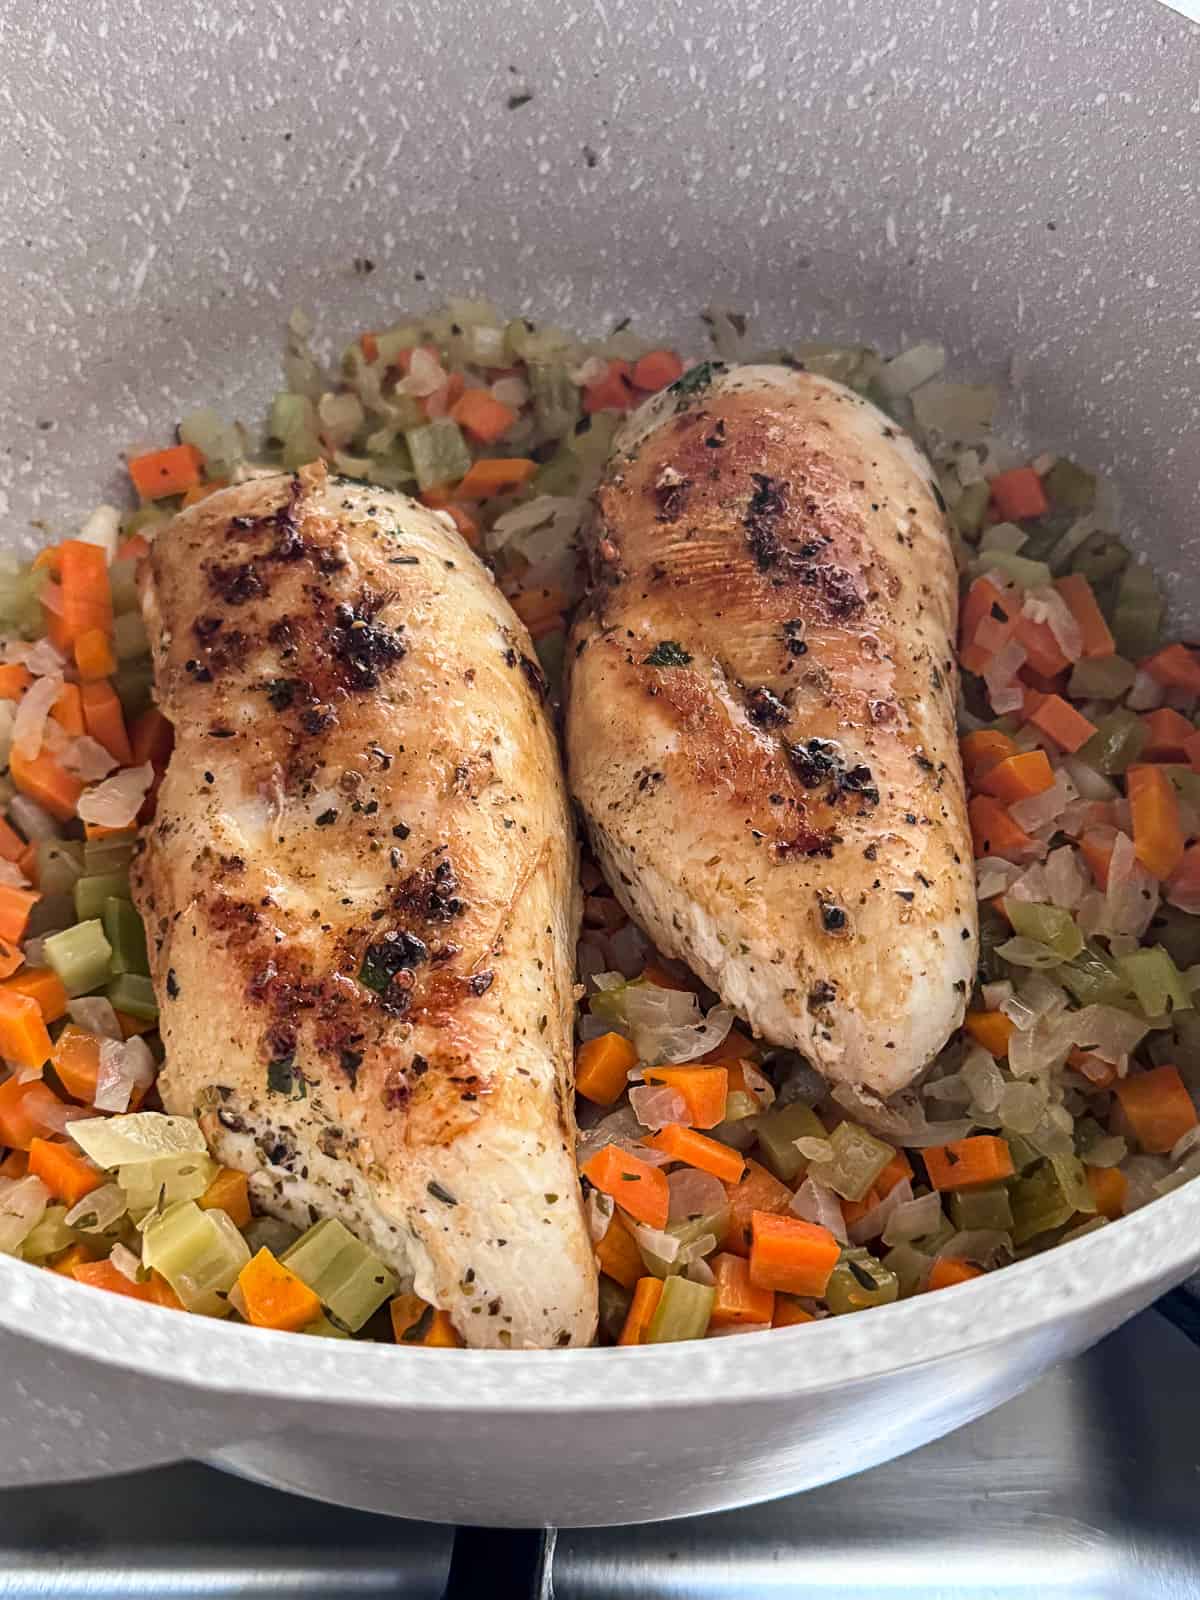 Cooking chicken with vegetables for soup